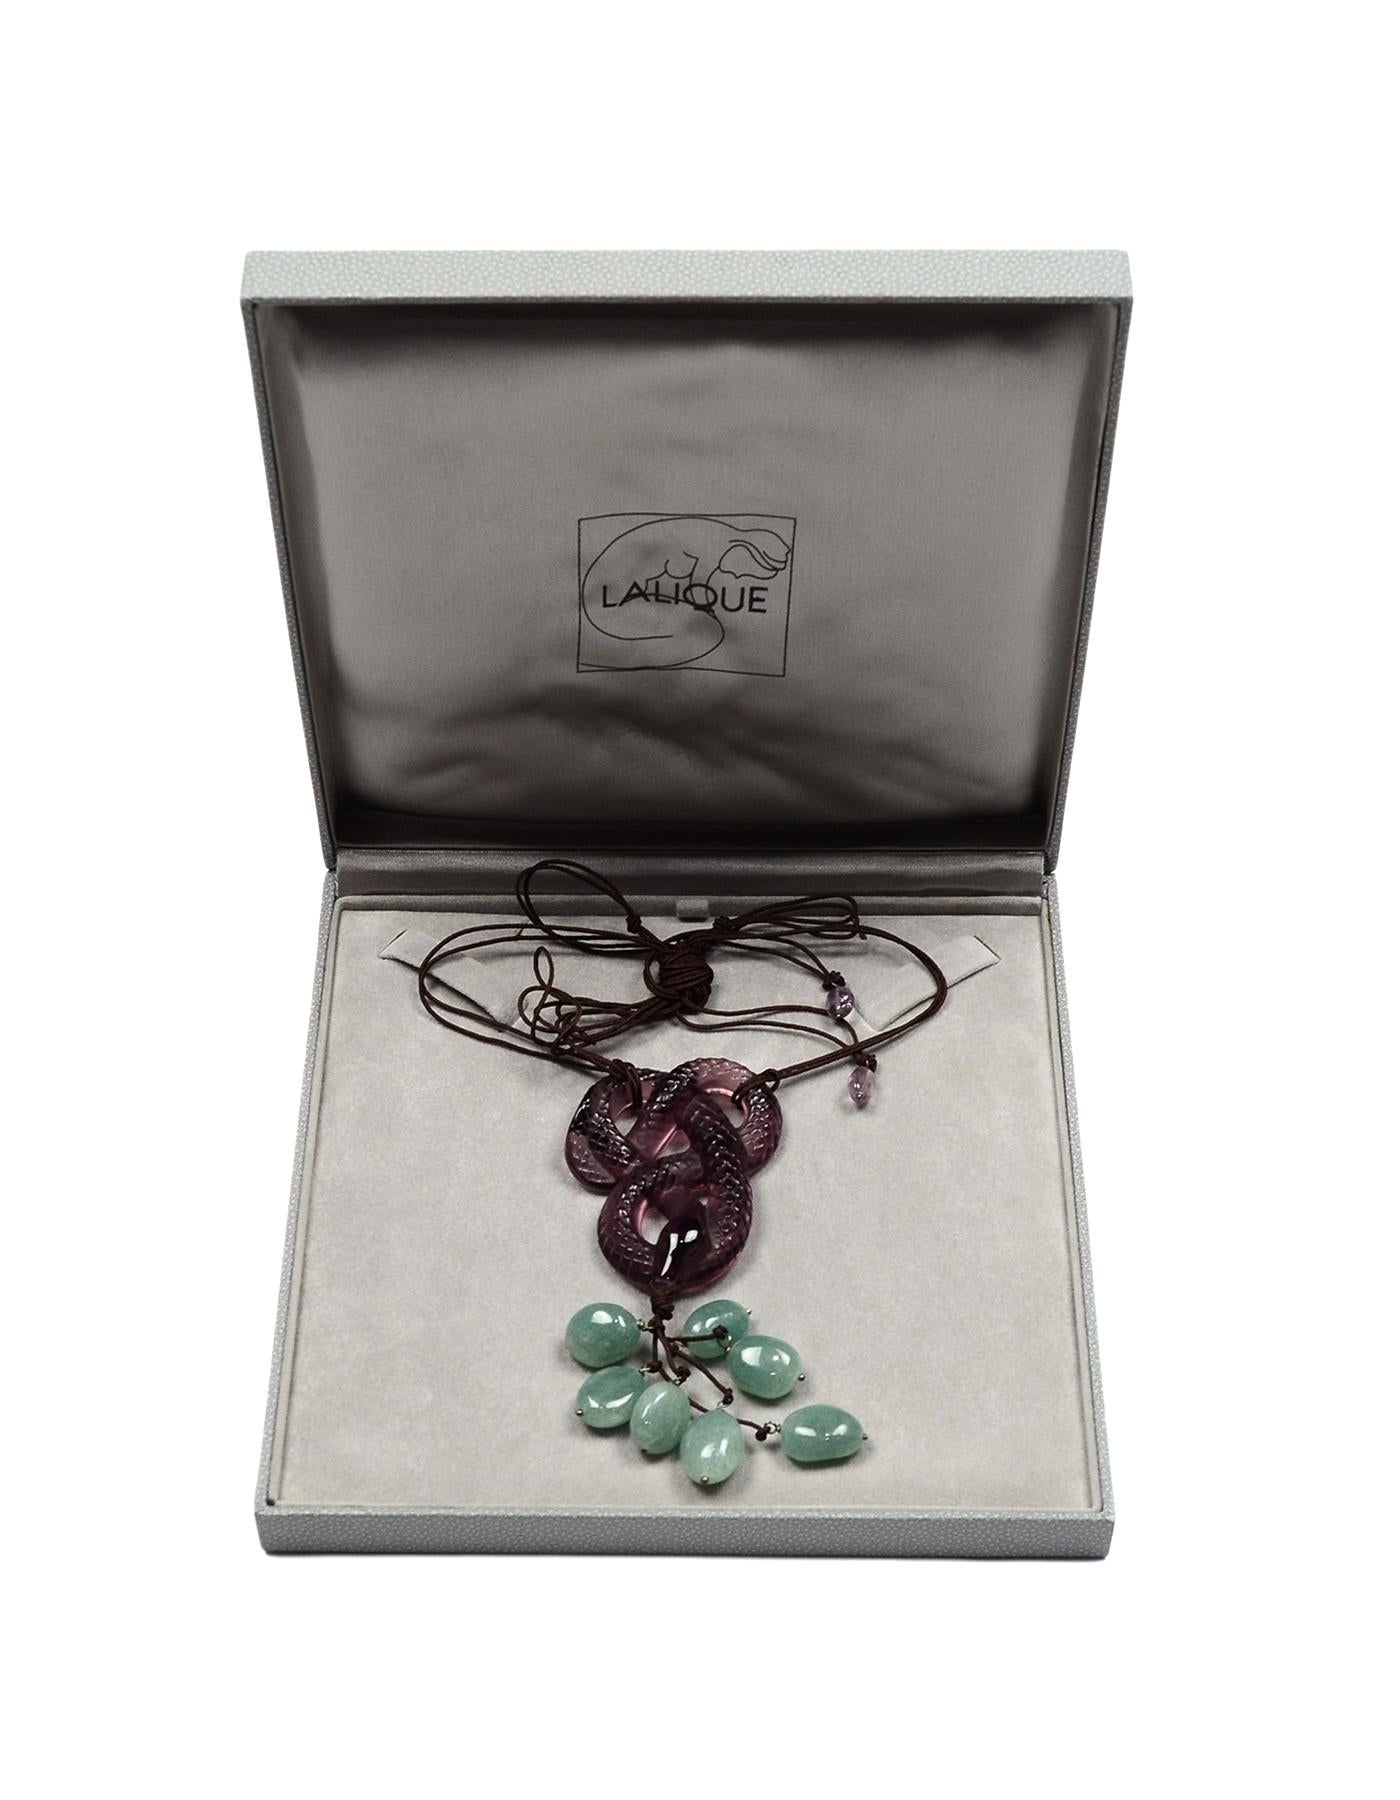 Lalique Purple Crystal Serpent Snake Rope Necklace W/ Green Aventurine 

Color: Brown, purple, green
Materials: Crystal, rope, aventurine 
Hallmarks: On back of snake- 